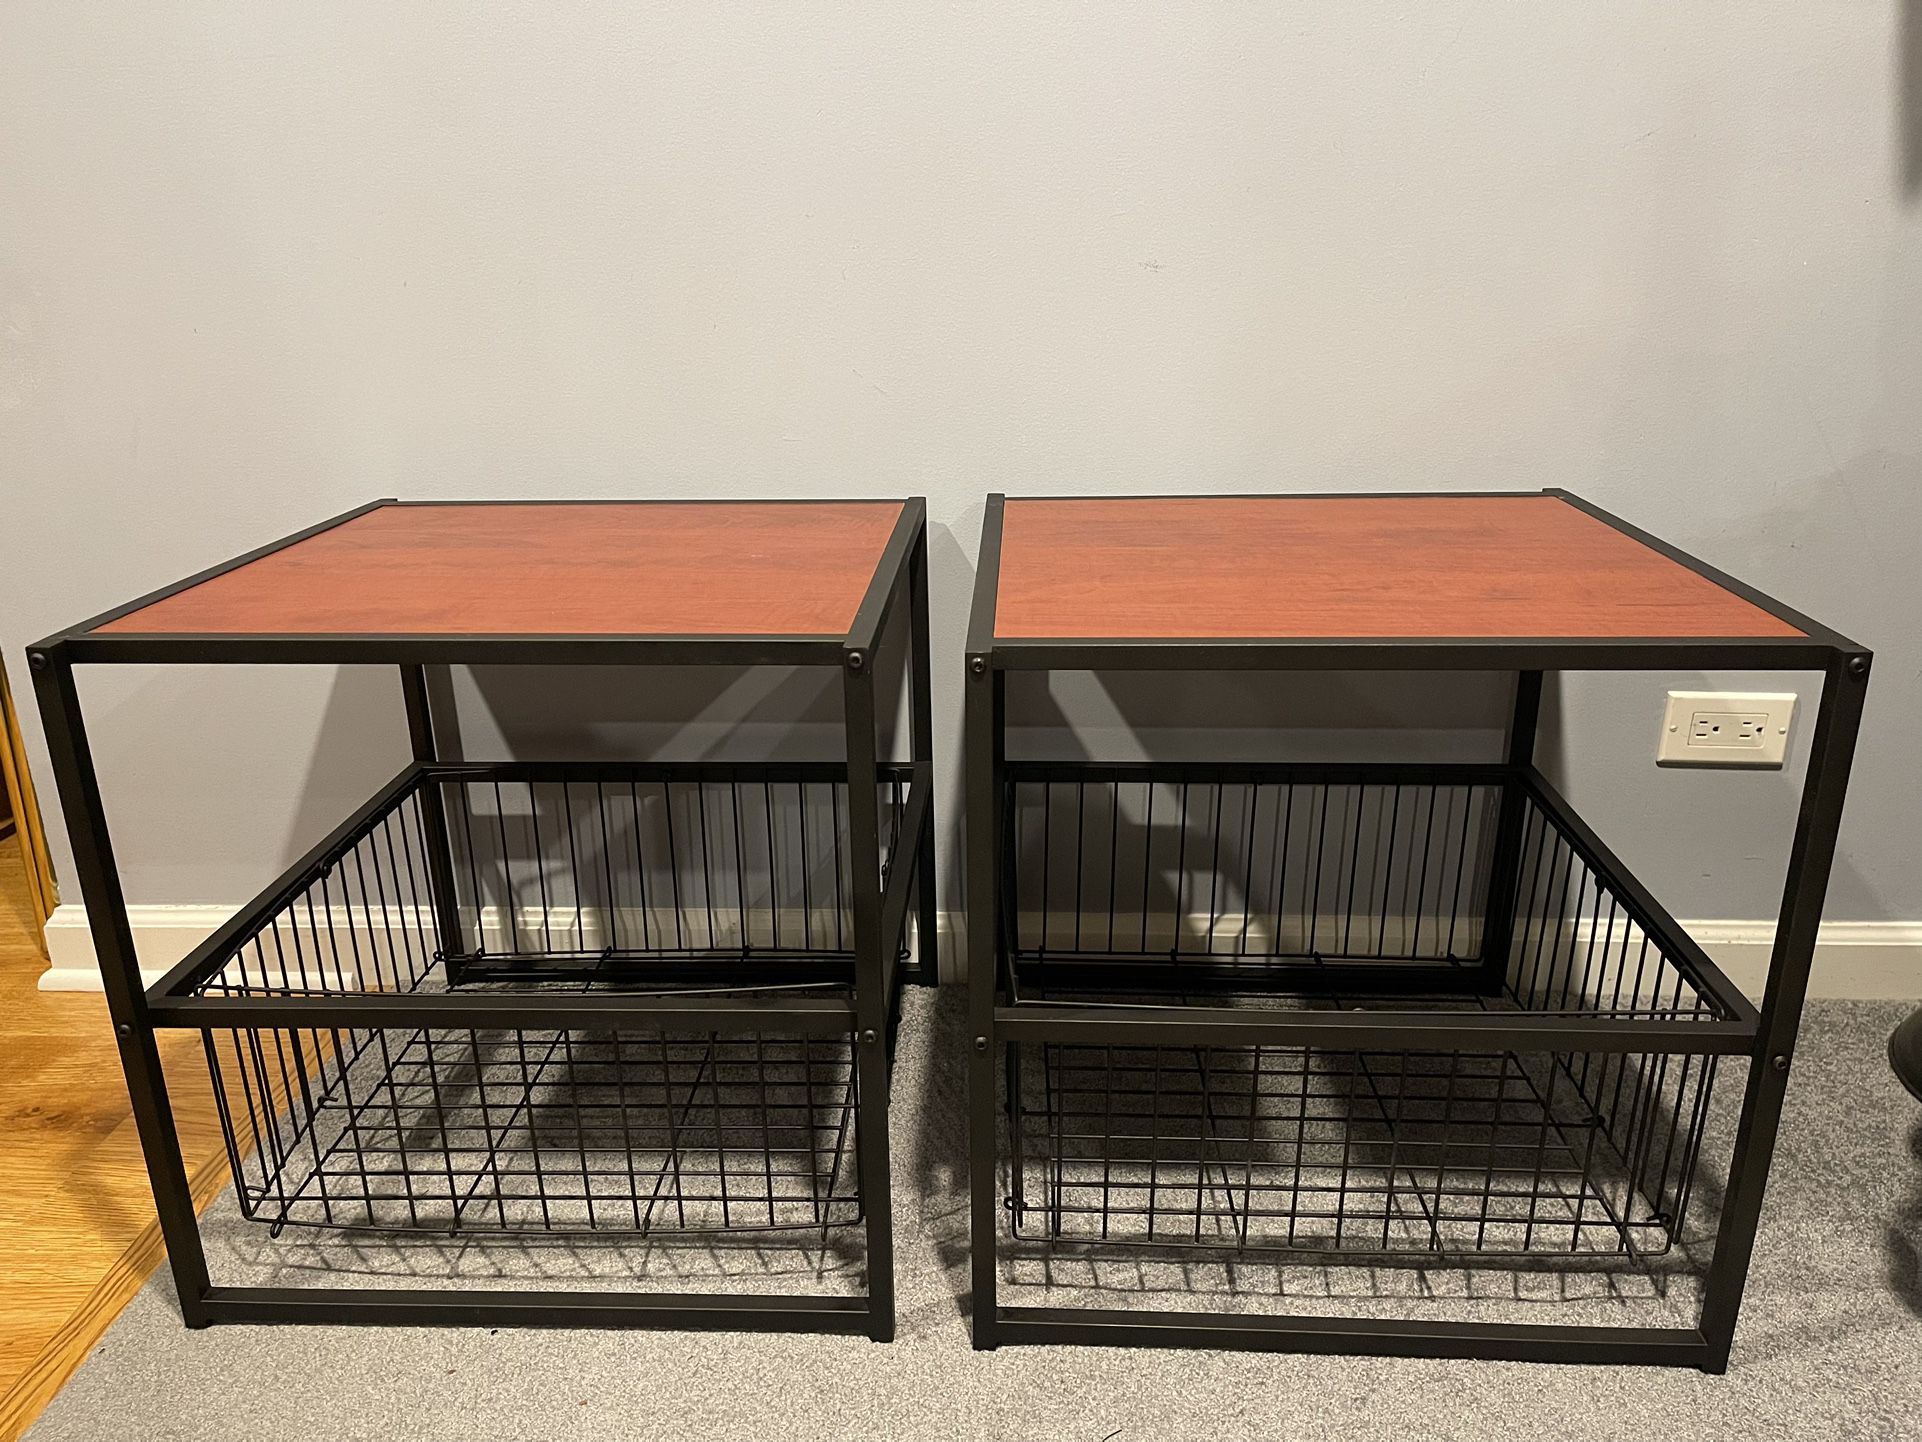 Pair of Side or End Tables with Bottom Metal Storage Bins…BOTH